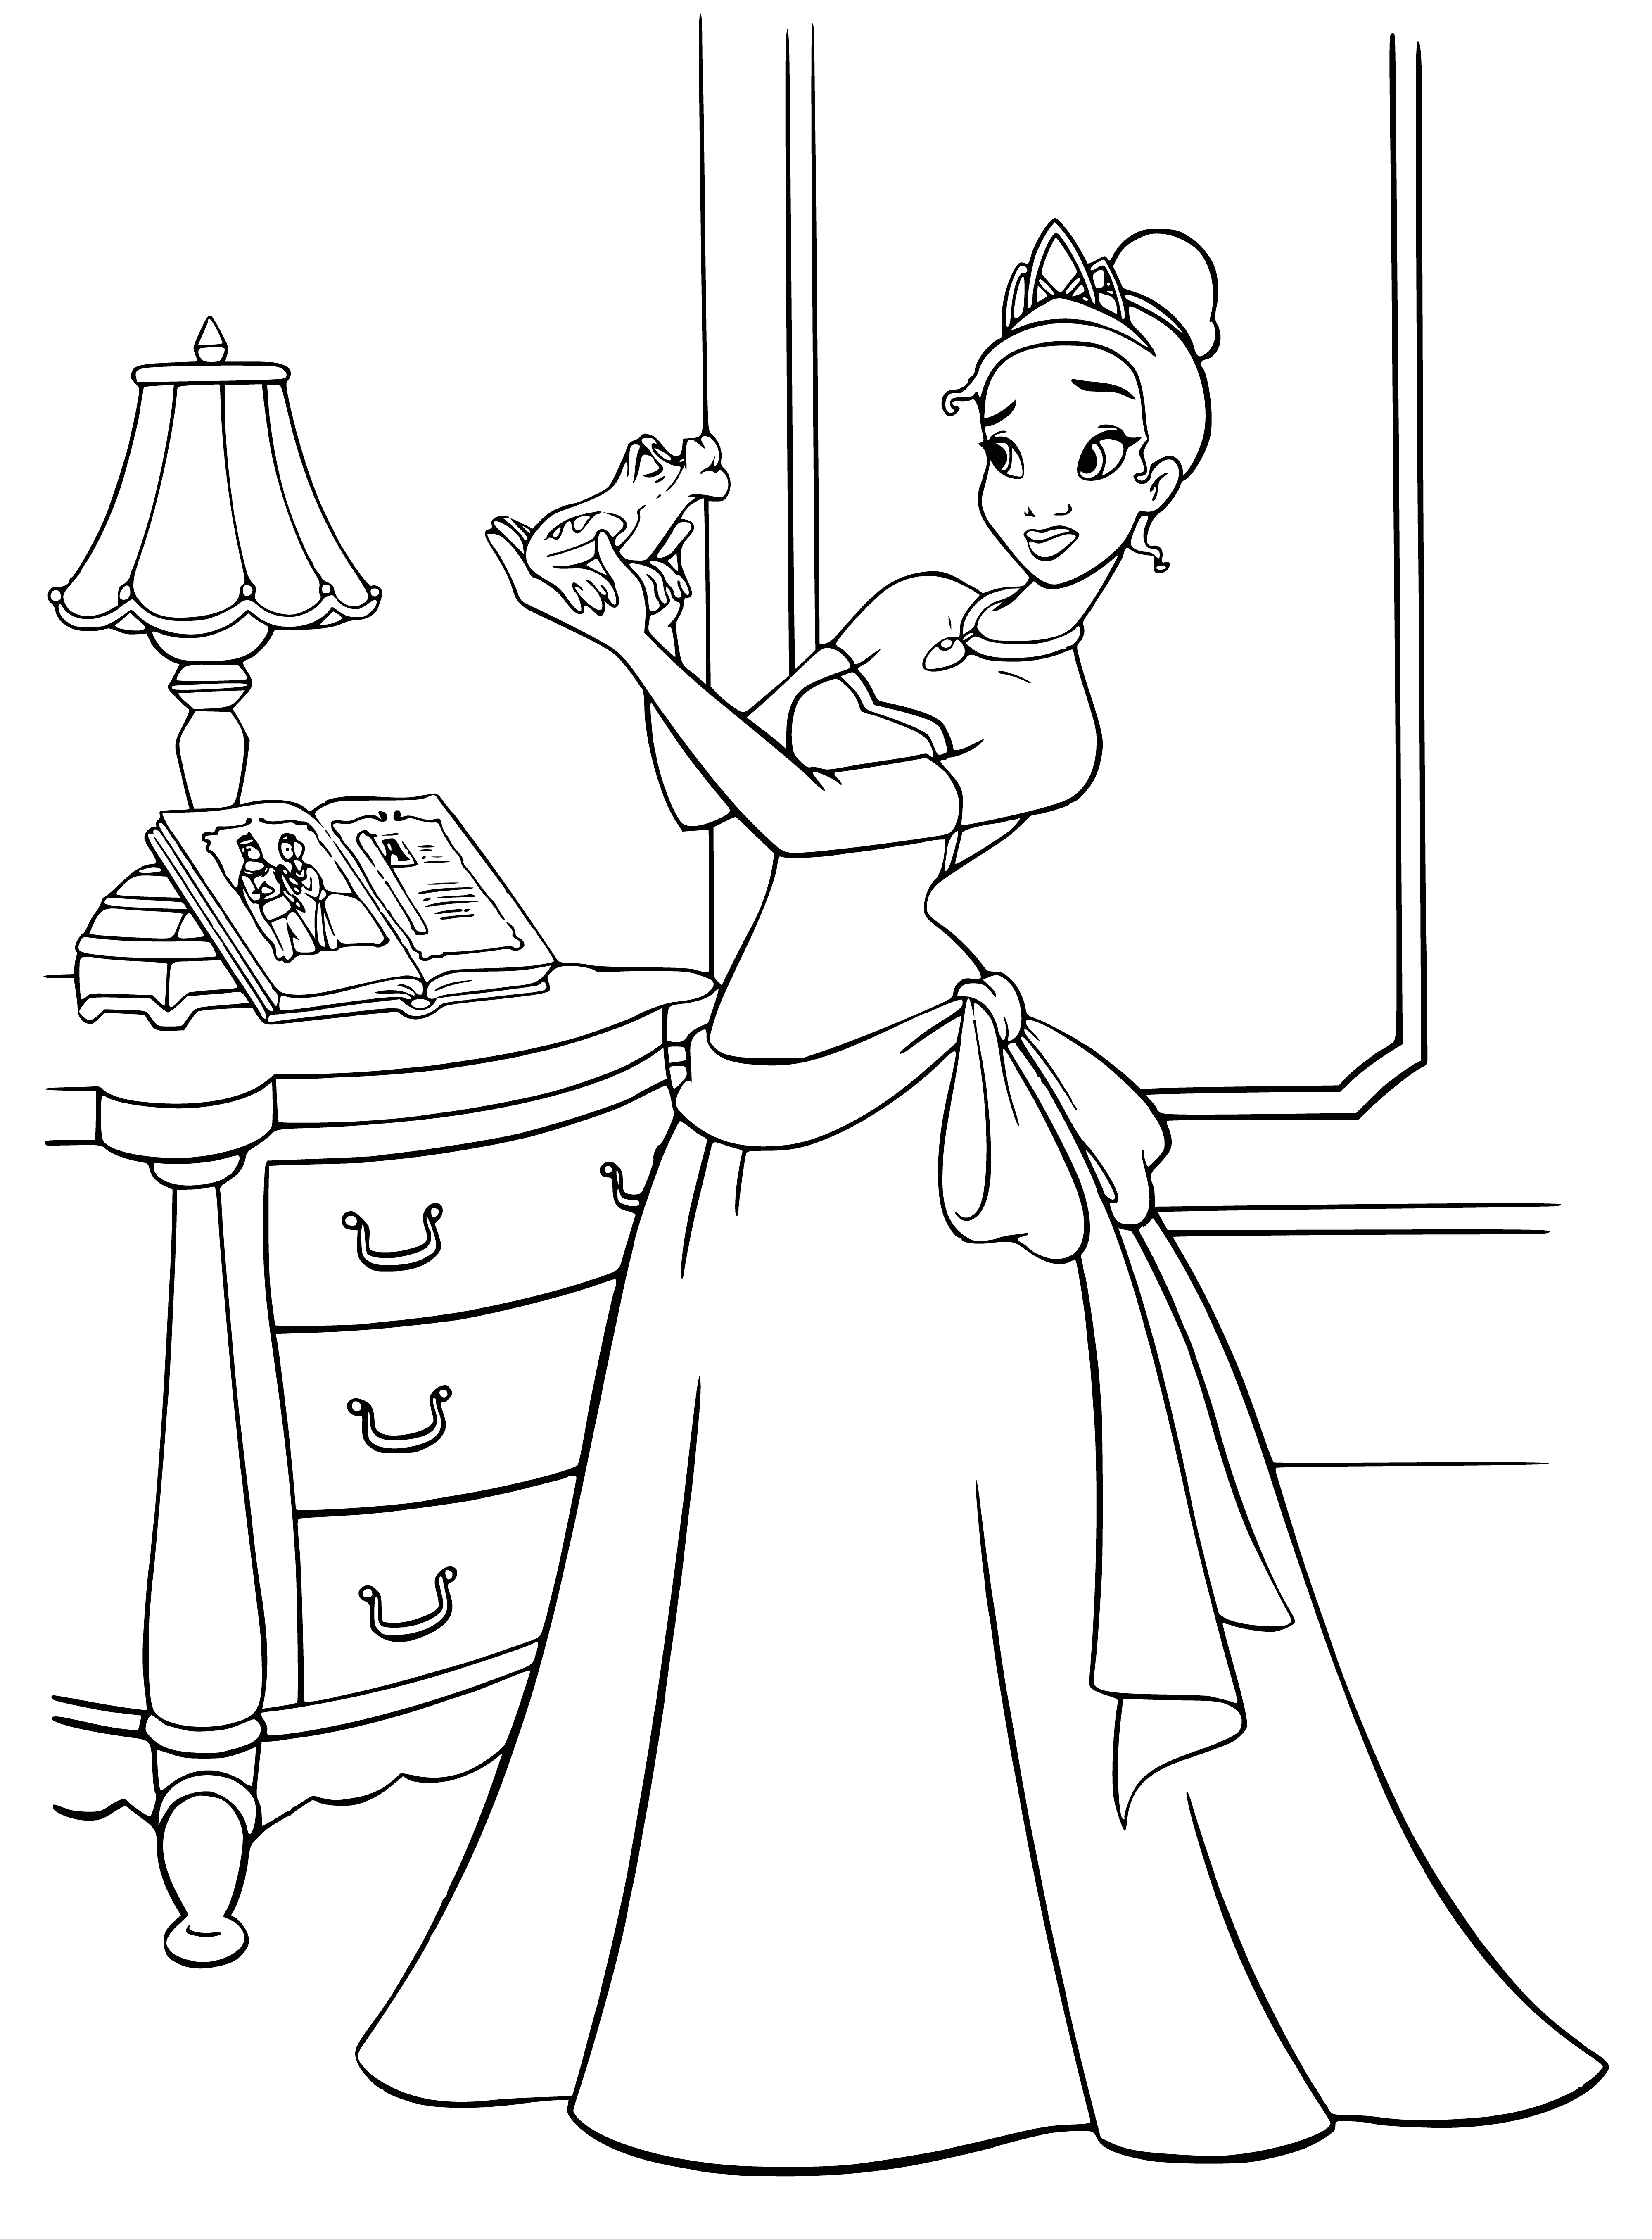 coloring page: A young woman in a green dress with yellow accents stands before a large, green frog with orange eyes wearing a purple vest. She looks happy and excited.